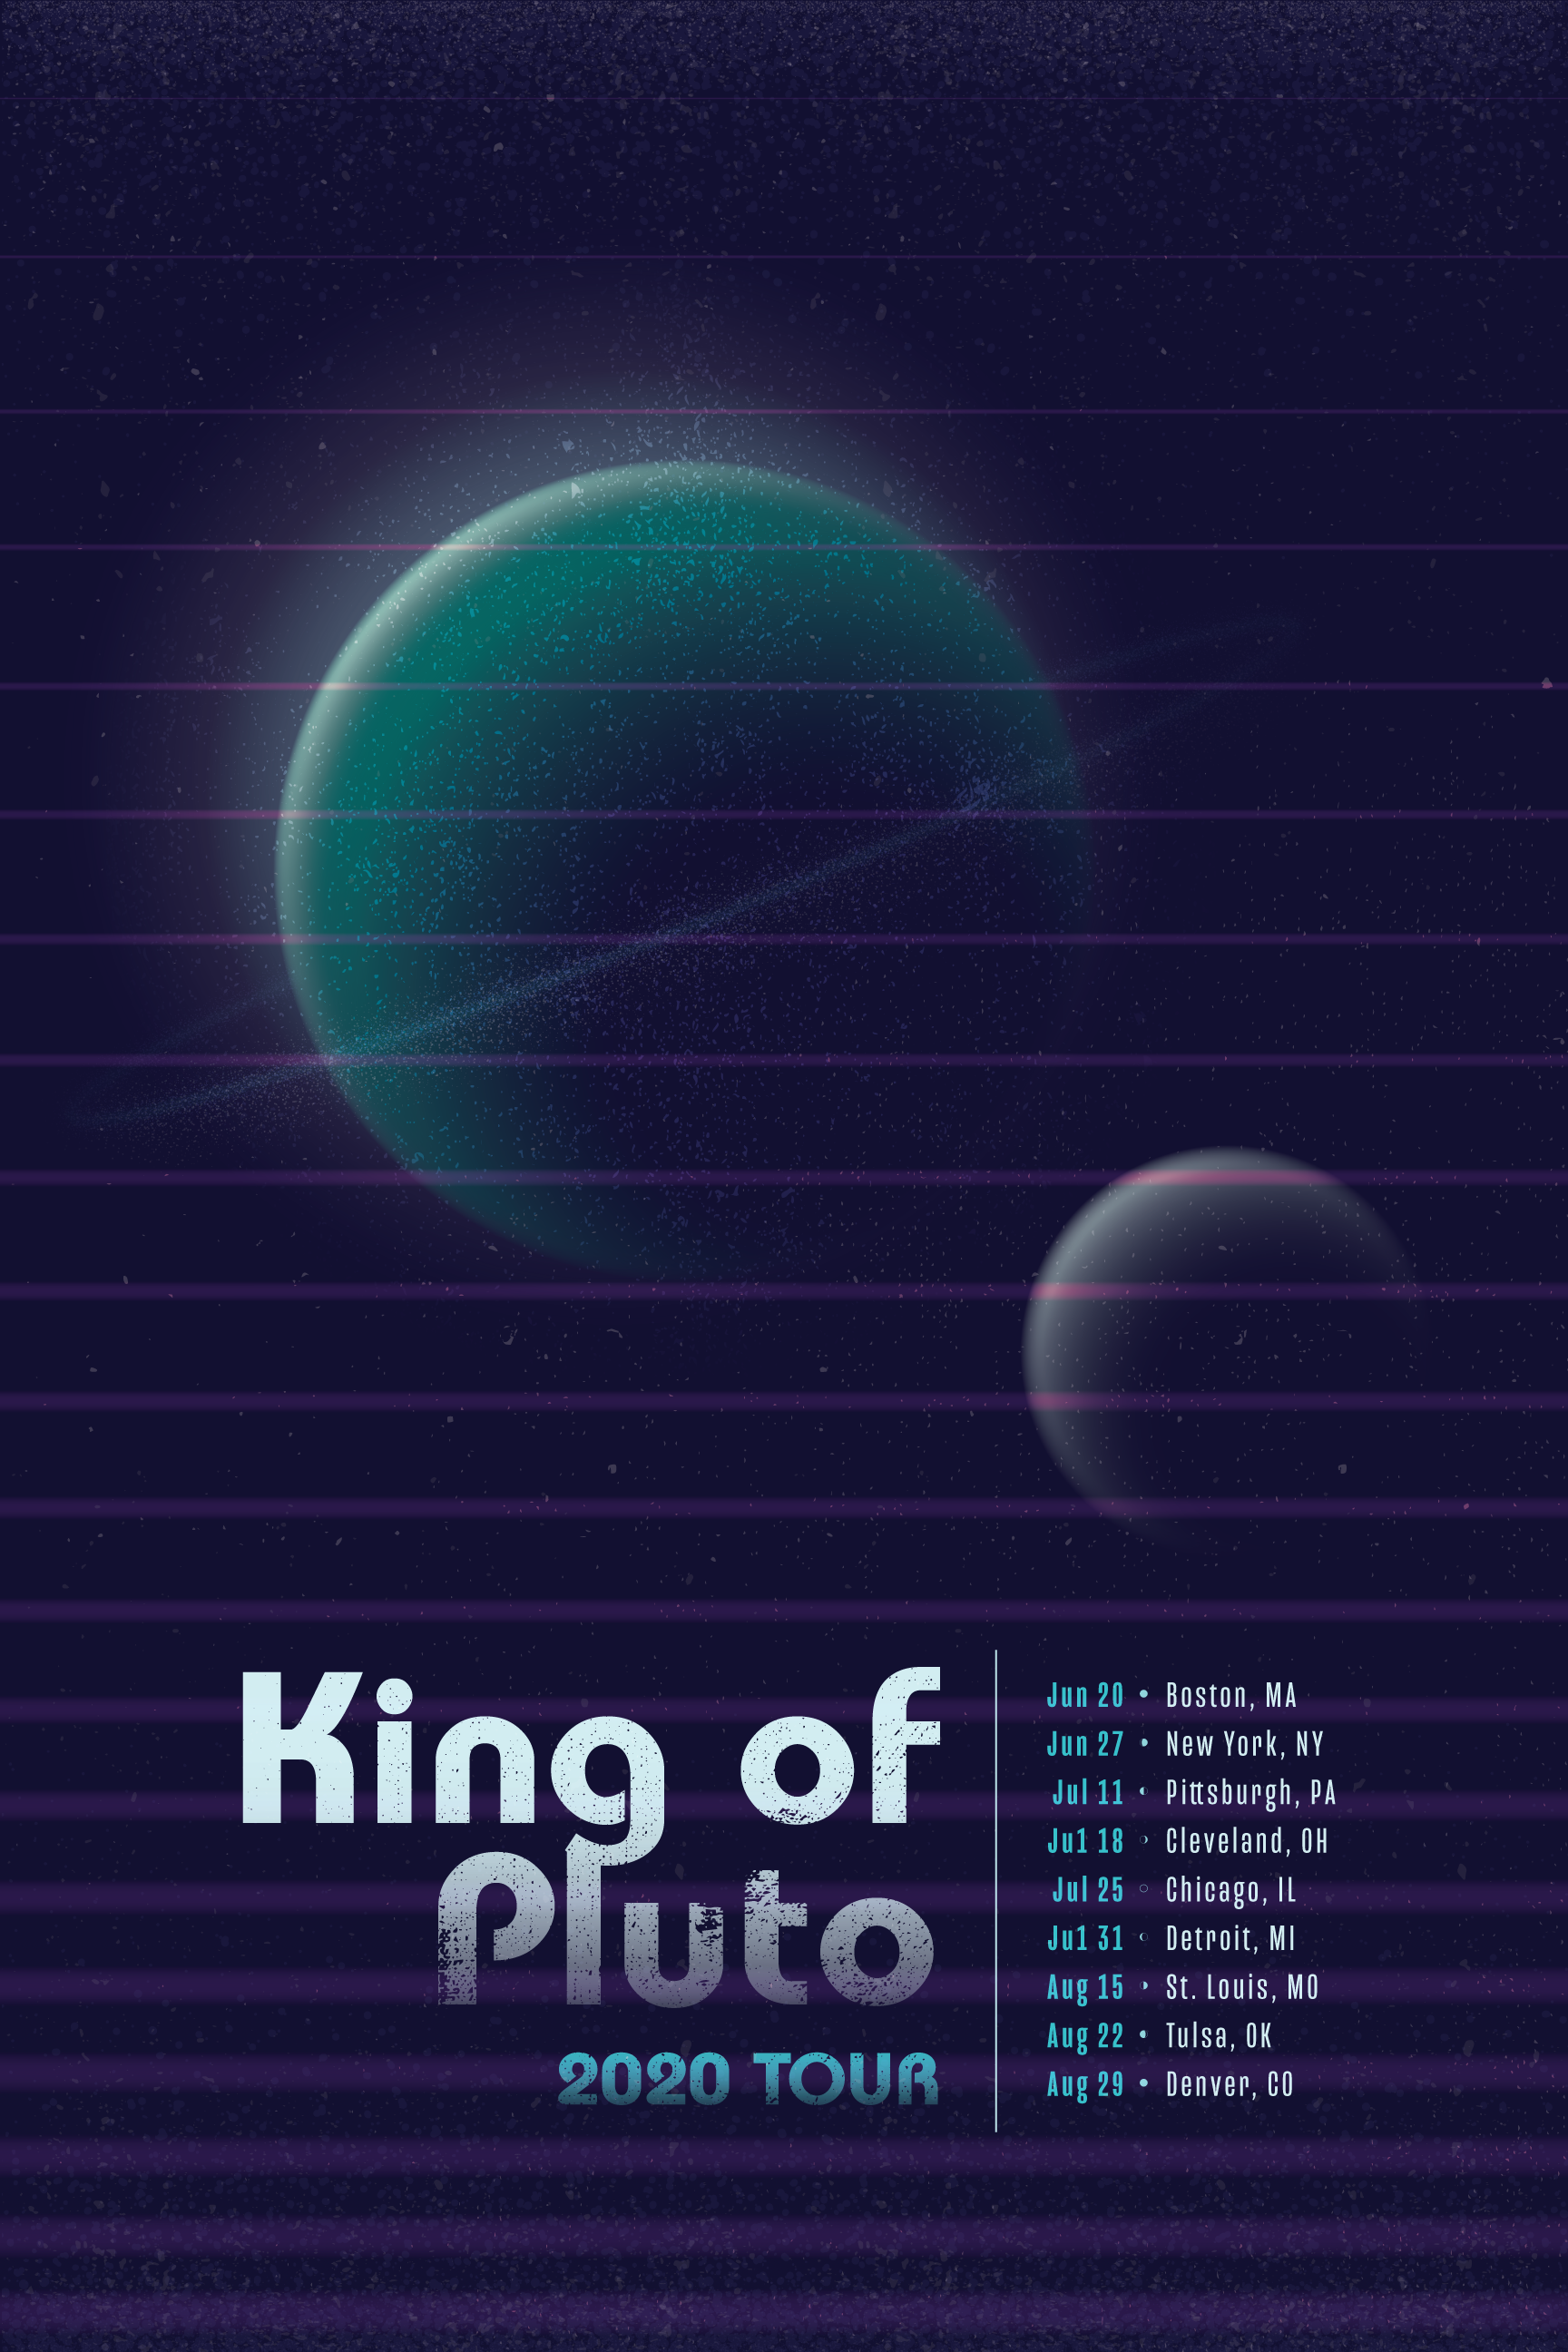 Poster 2: King of Pluto 2020 Tour. Similar design to the first with different colors.